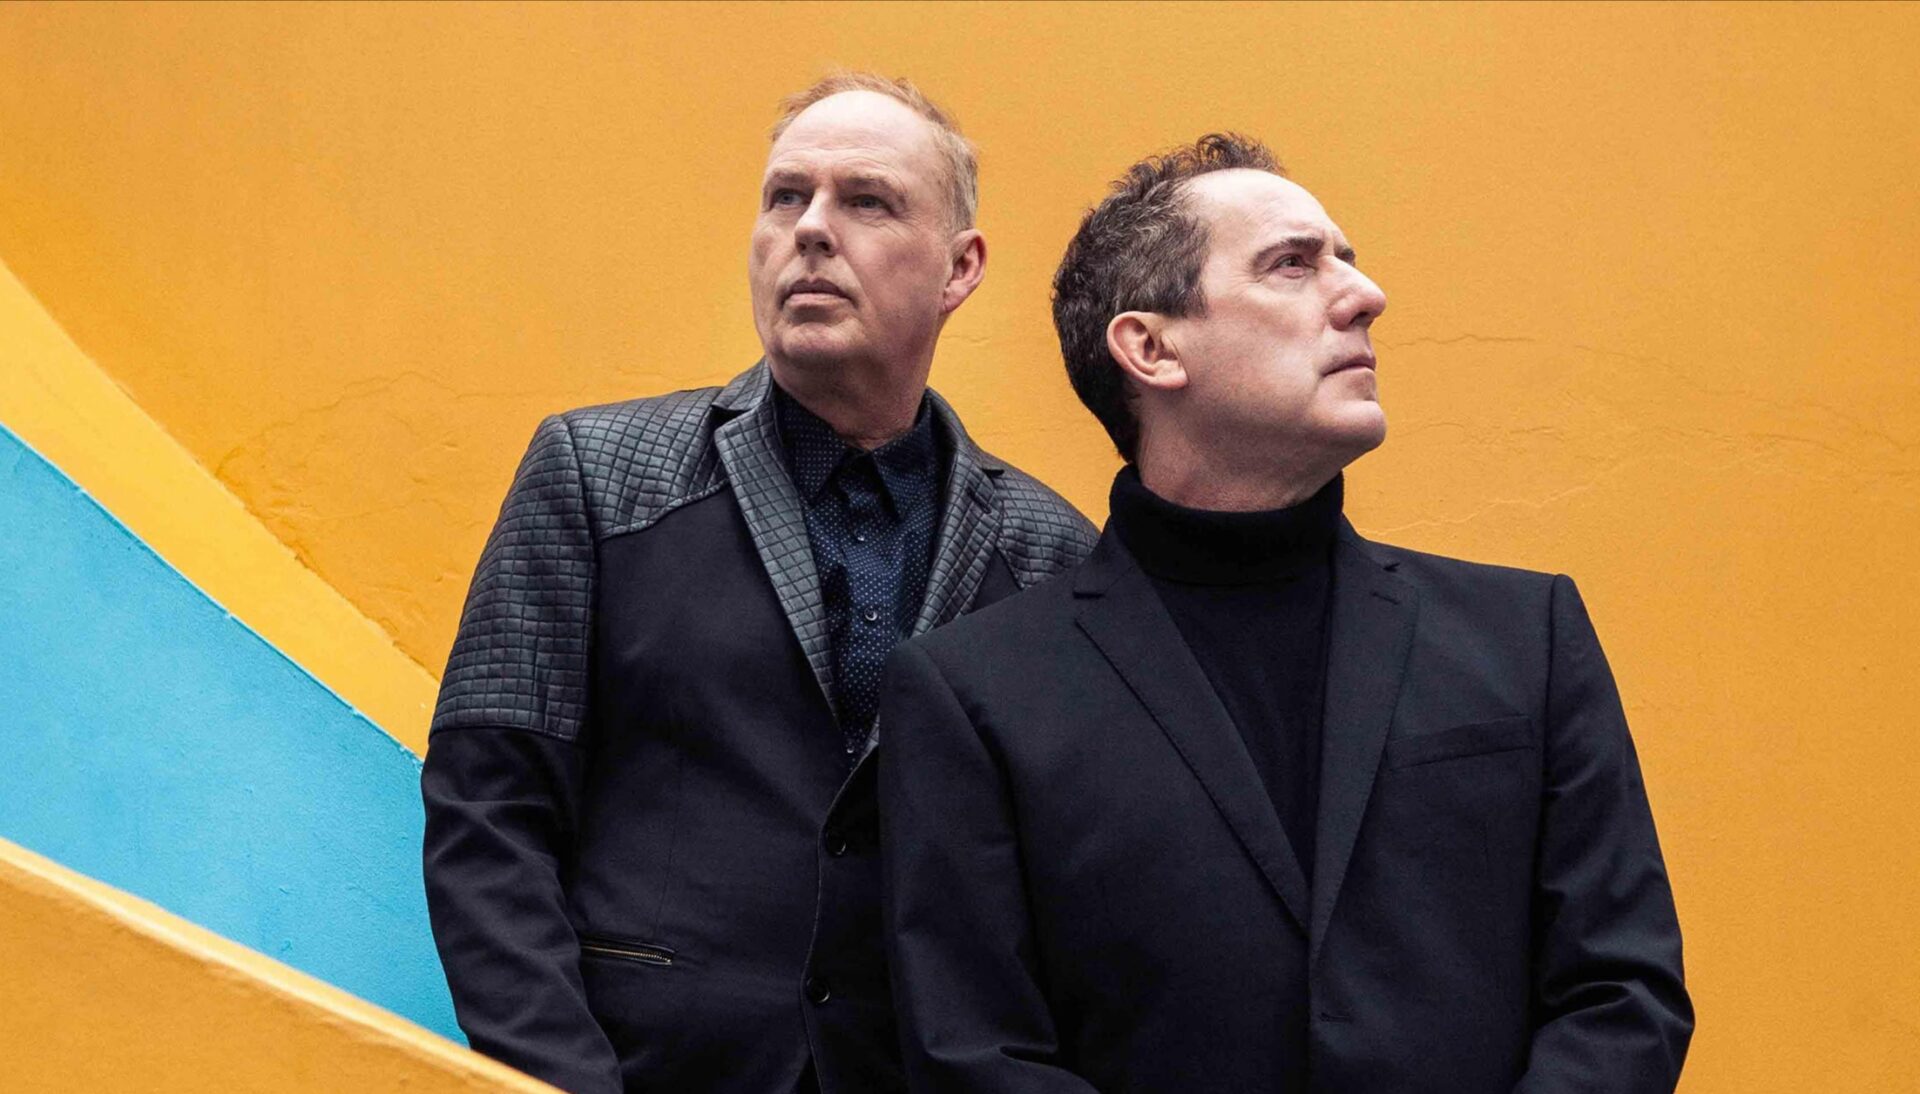 Orchestral Manoeuvres In The Dark / MiG 15 - Birmingham Symphony Hall, 05/11/2019